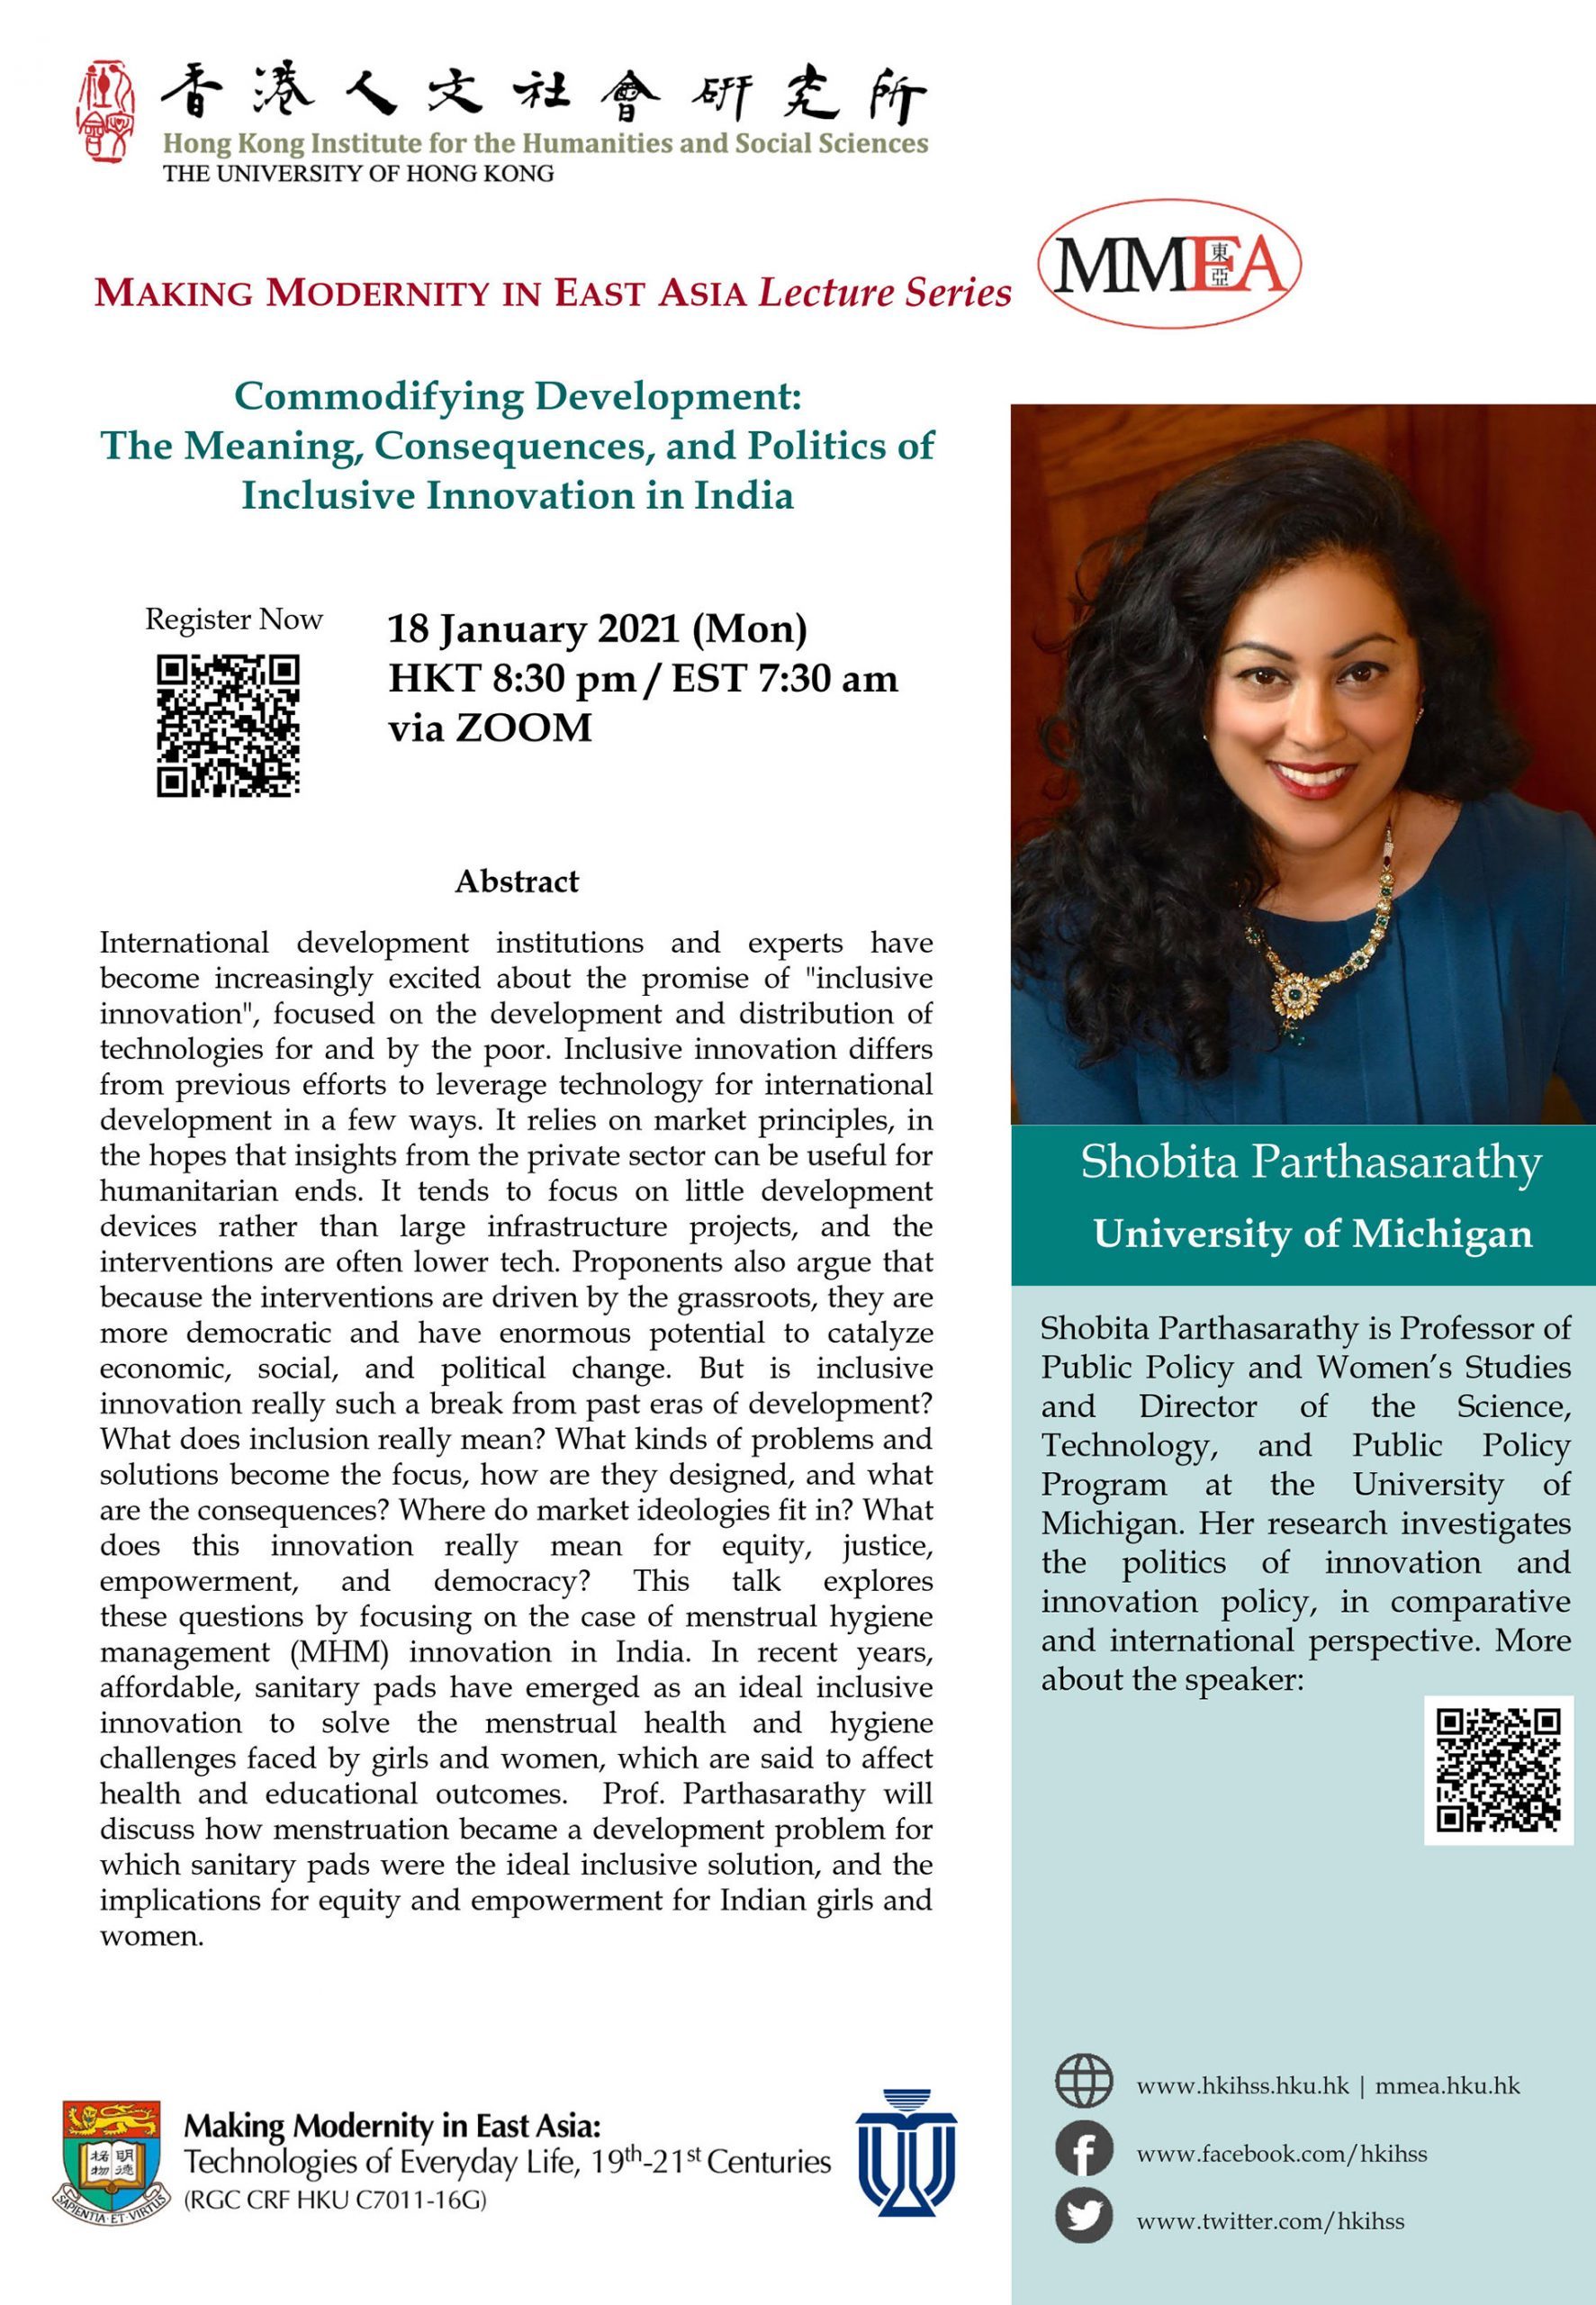 MMEA Lecture Series “Commodifying Development: The Meaning, Consequences, and Politics of Inclusive Innovation in India” by Professor Shobita Parthasarathy (January 18, 2021)